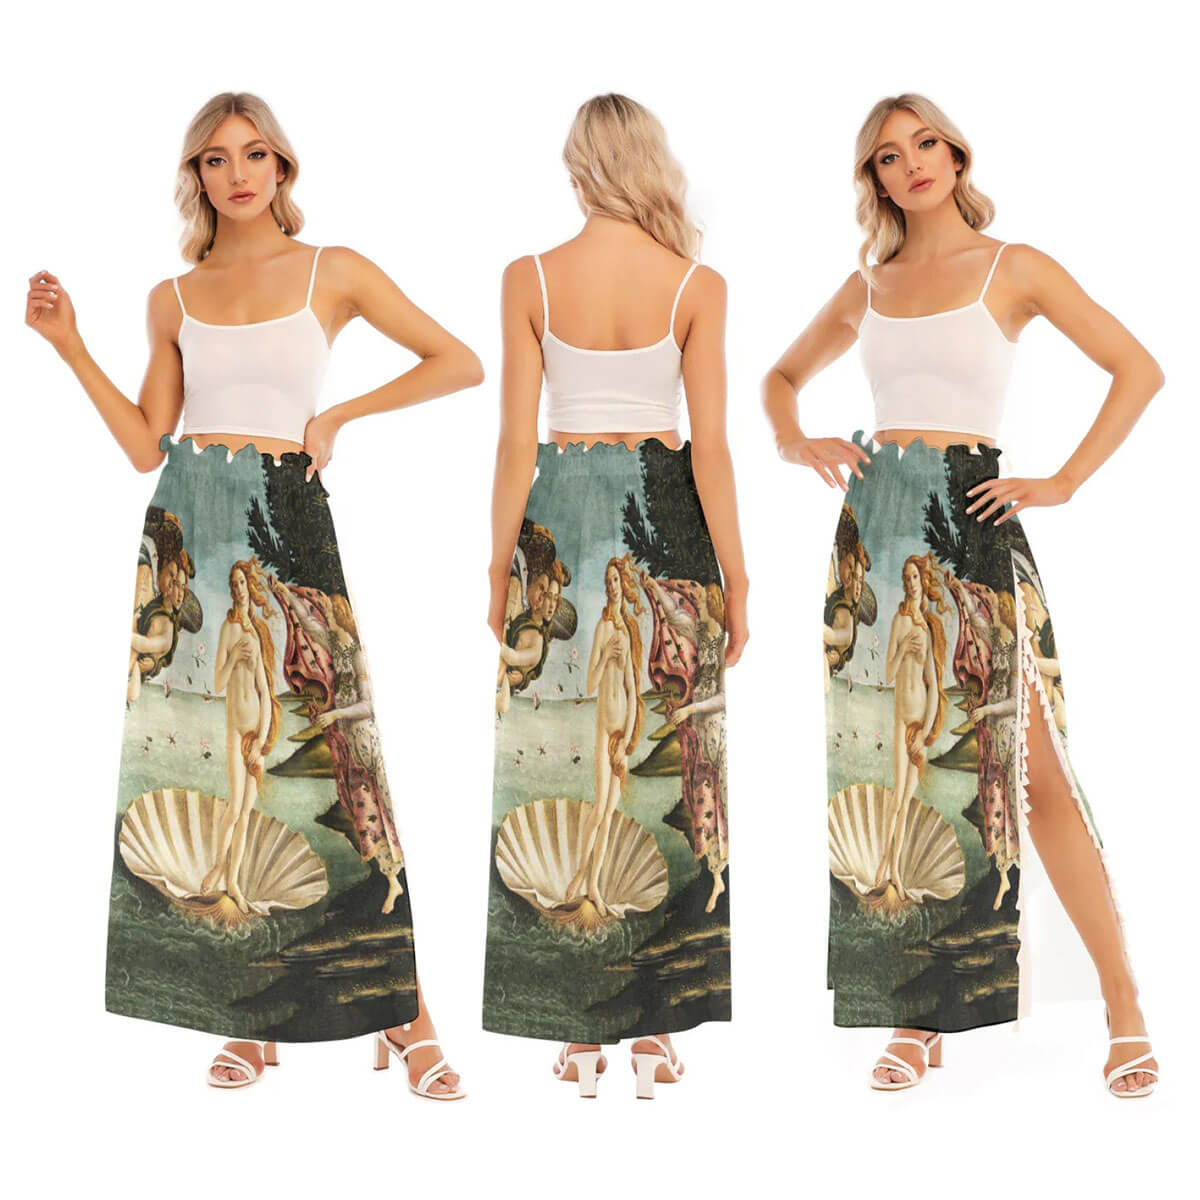 Artistic Skirts from The Most Iconic Art